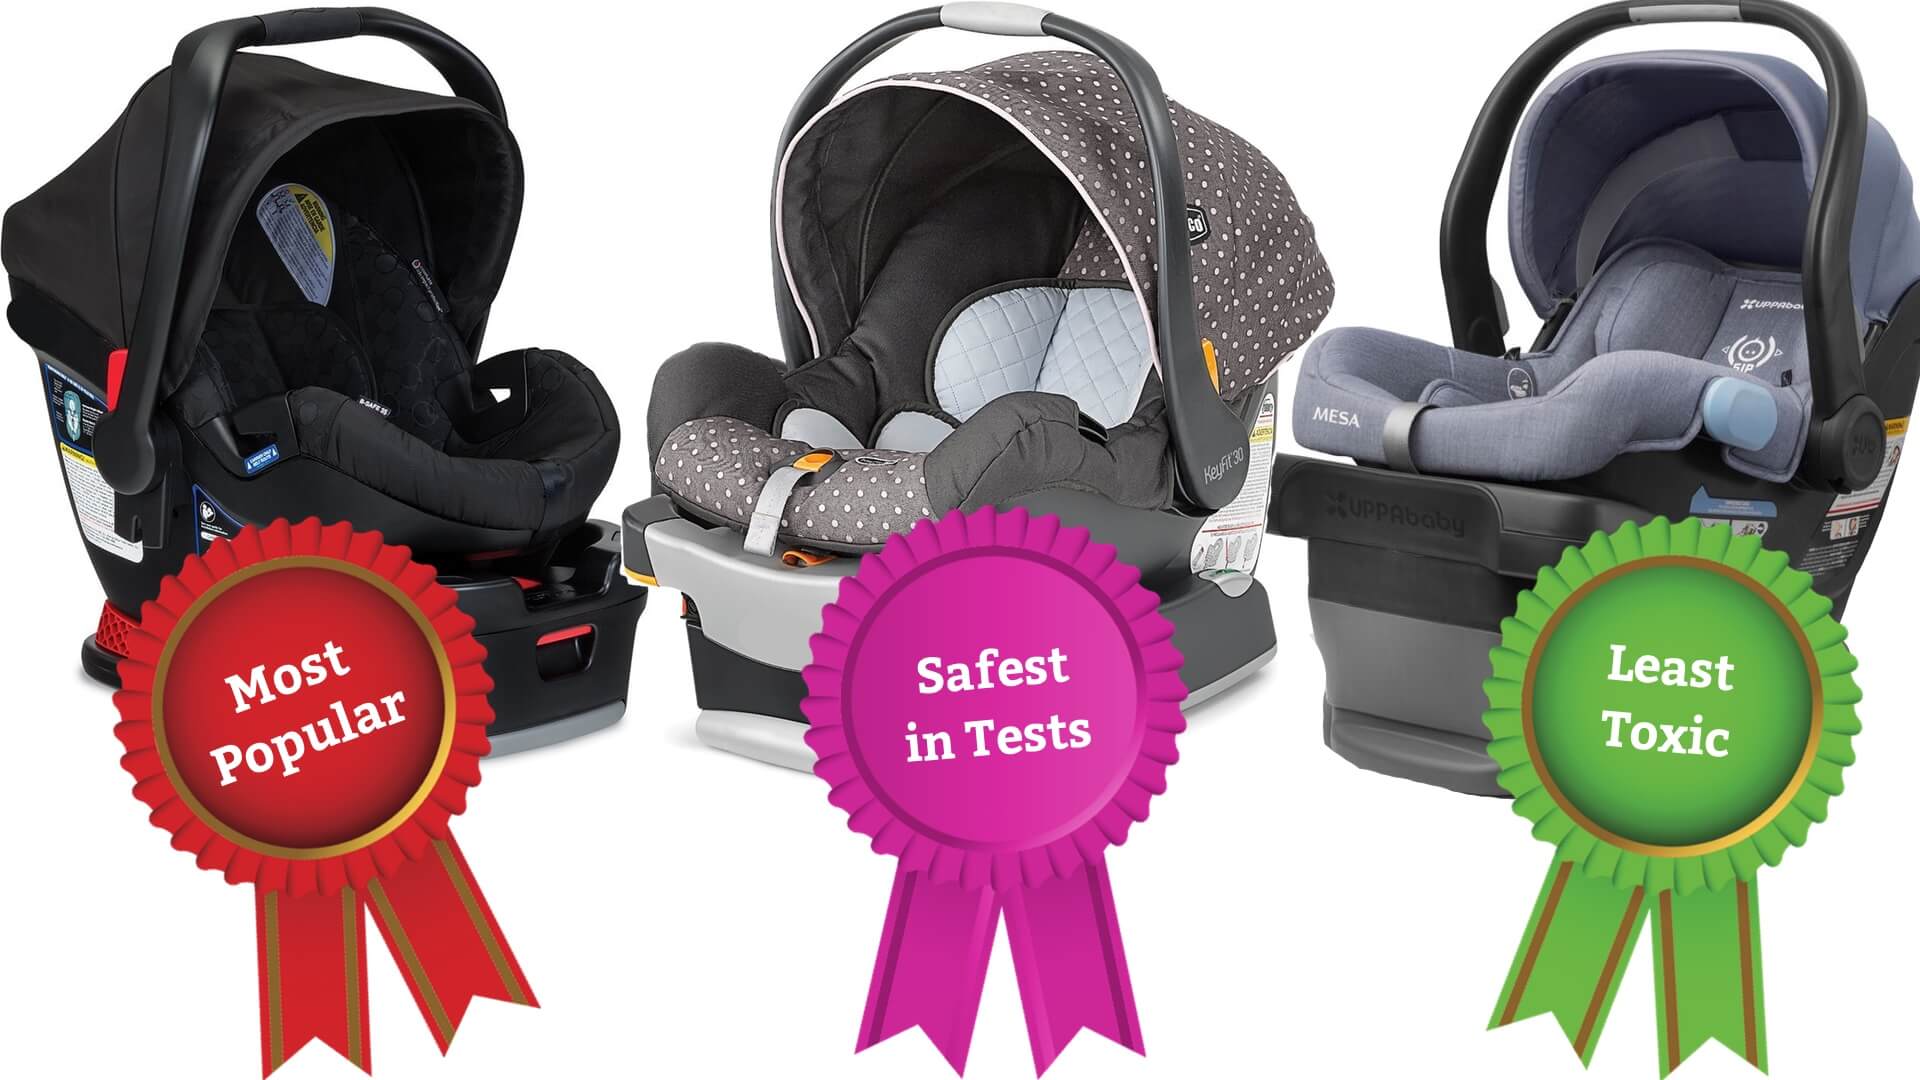 Best Infant Car Seat Safest Most, What Is The Best And Safest Baby Car Seat